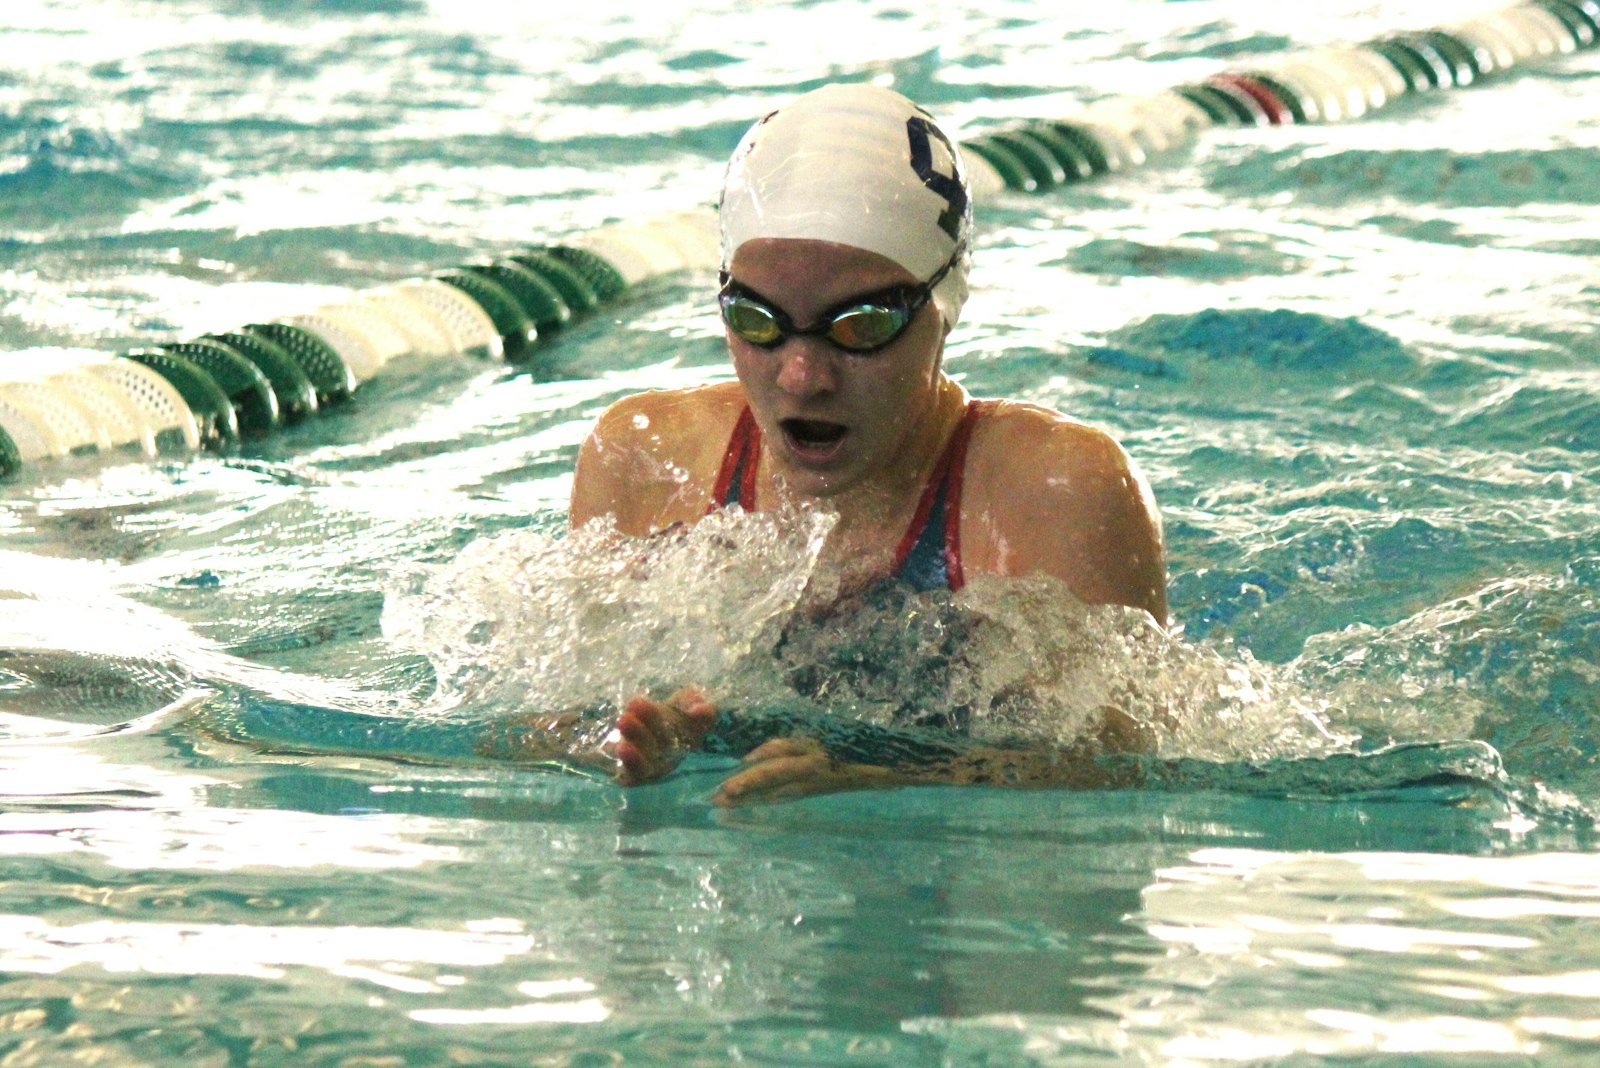 Bloomfield Hills Cranbrook freshman Elizabeth Kurz comes up for air in the final stretch of the 100 breaststroke. Kurz won the race with a time of 1:07.69, contributing to the Cranes’ second-place team finish overall.